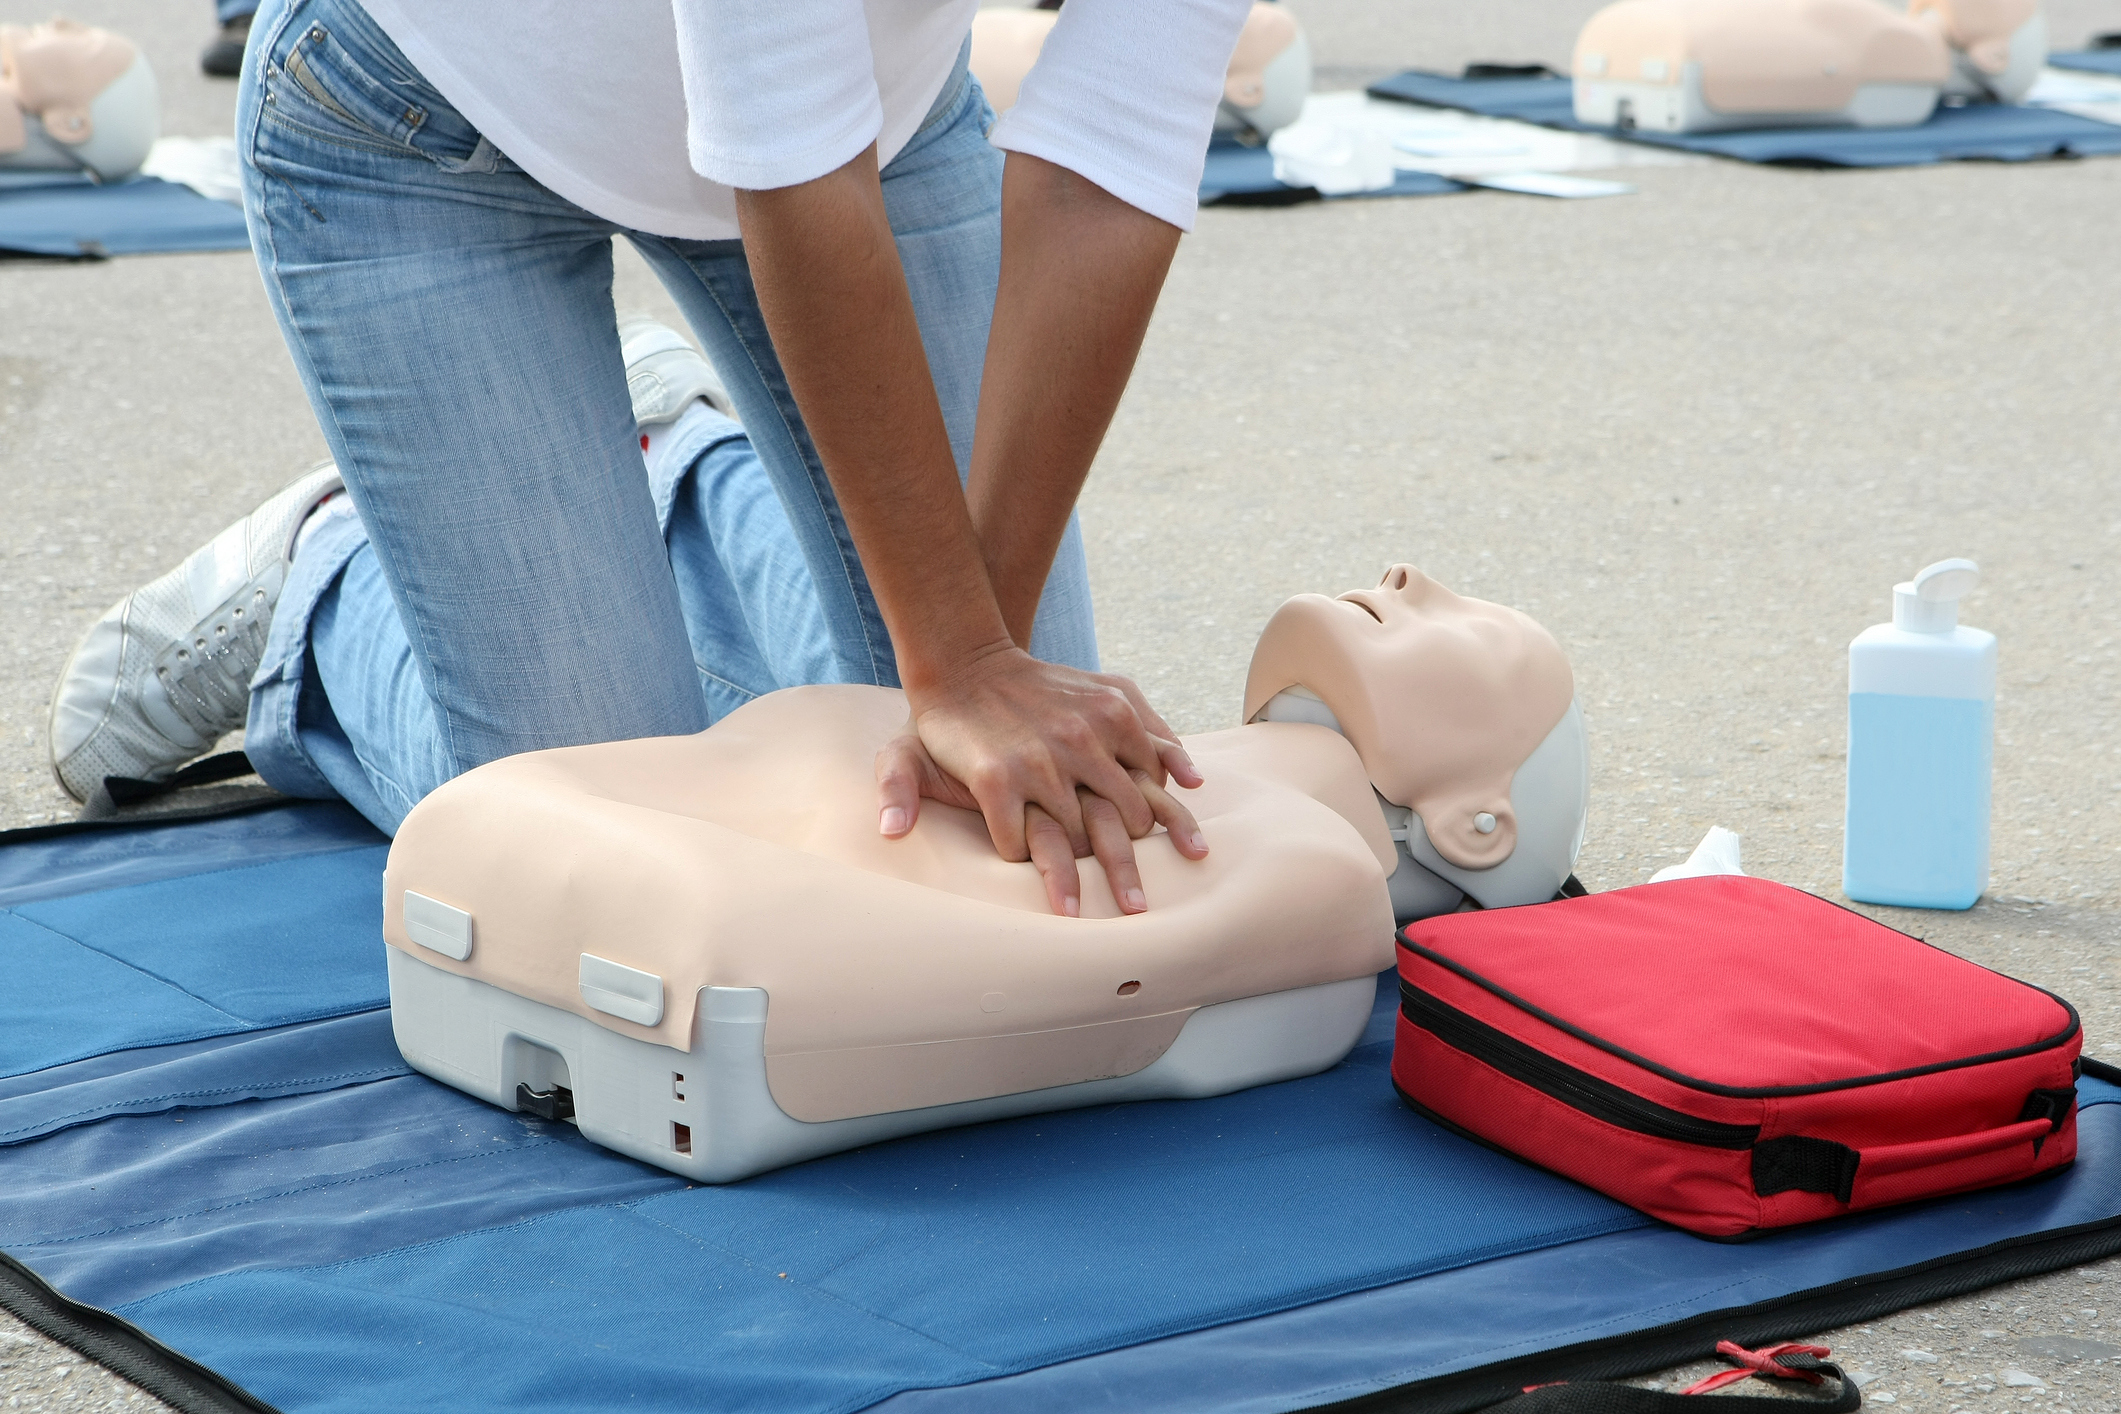 498609577-female-instructor-showing-cpr-on-training-dolljpg